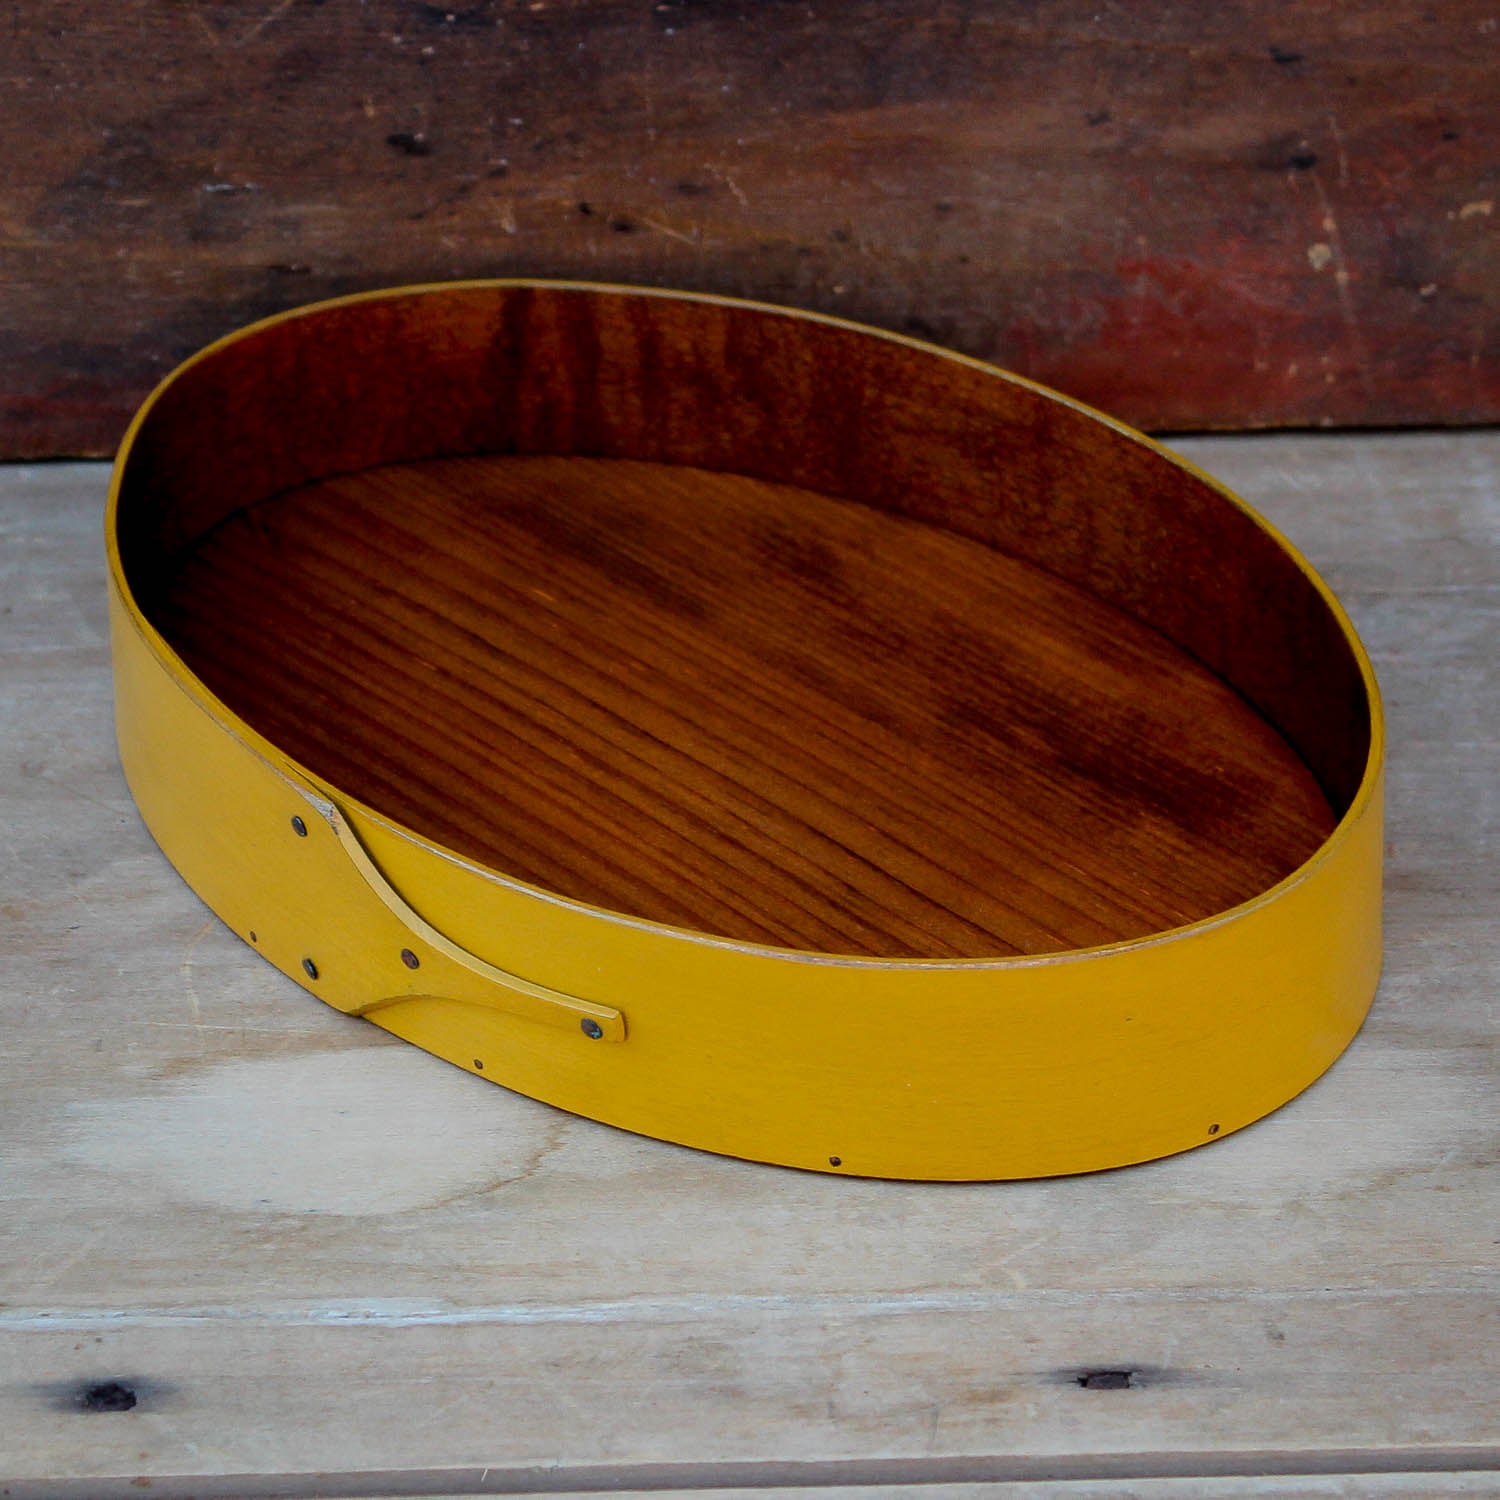 Shaker Style Oval Stitchers Tray, LeHays Shaker Boxes, Handcrafted in Maine, Yellow Milk Paint Finish, Side View